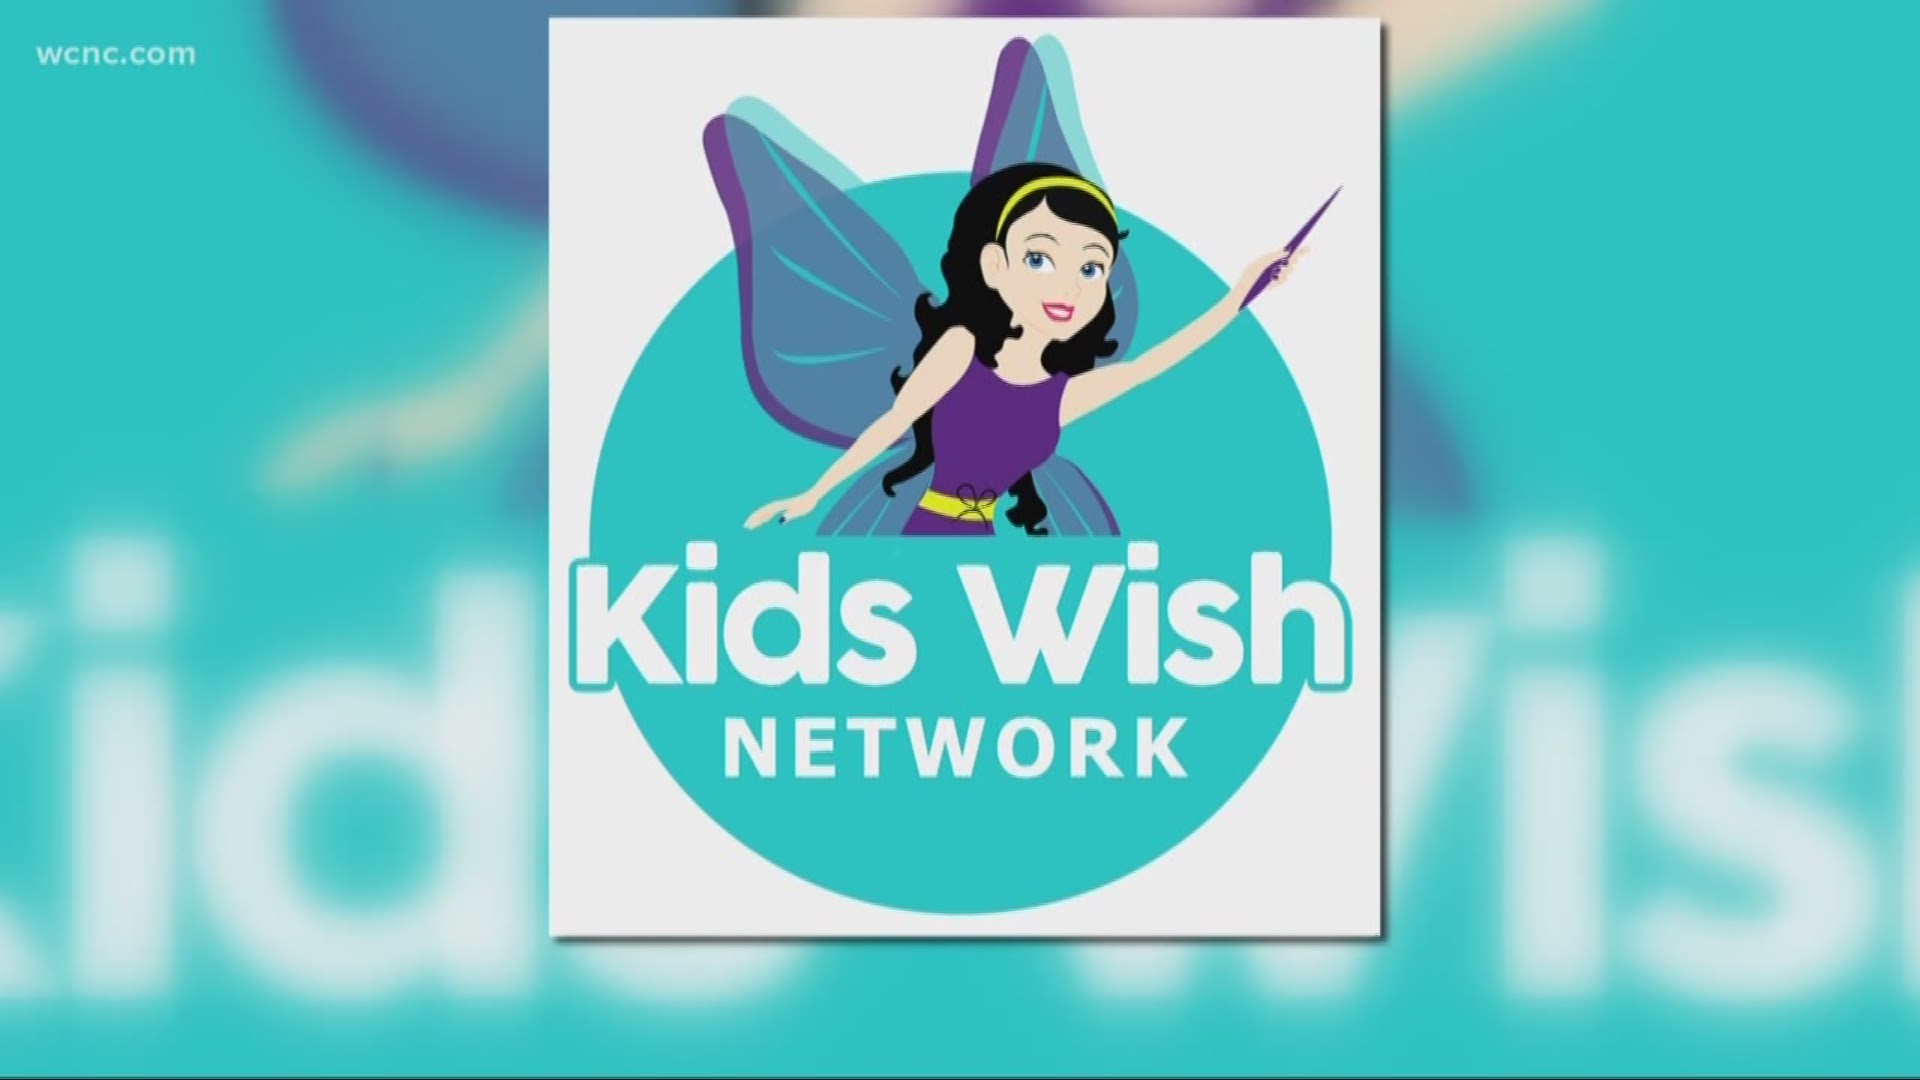 A local man was almost scammed after someone saying they were from the Kids Wish Network asked for an immediate over the phone donation.